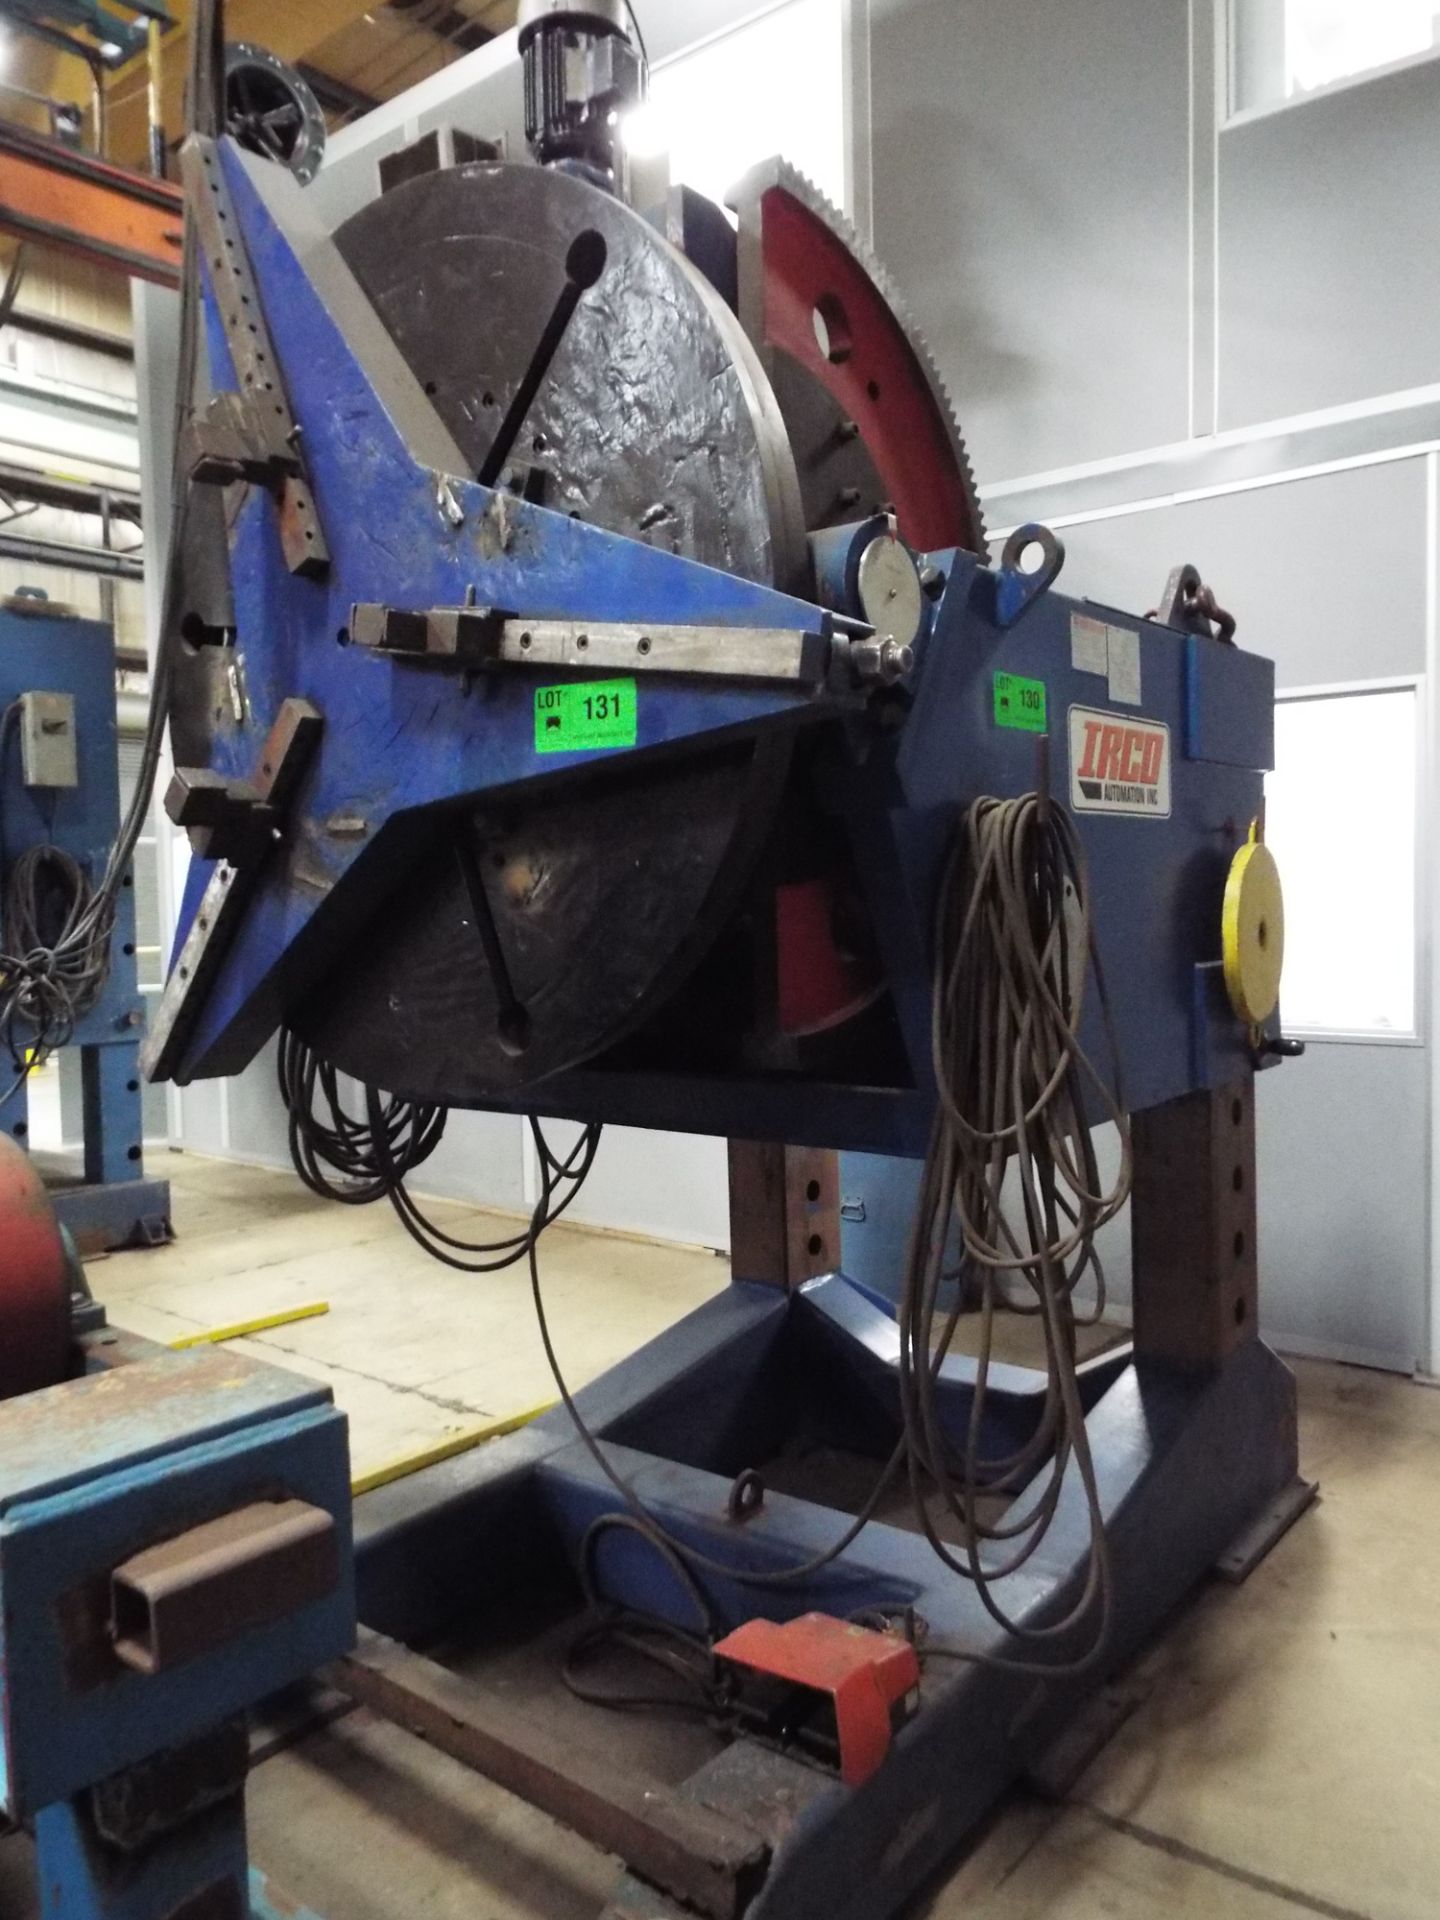 IRCO (2008) SHB40 TILT & ROTATE WELDING POSITIONER WITH 4000 KG MAX. LOADING WEIGHT, 55" DIA.